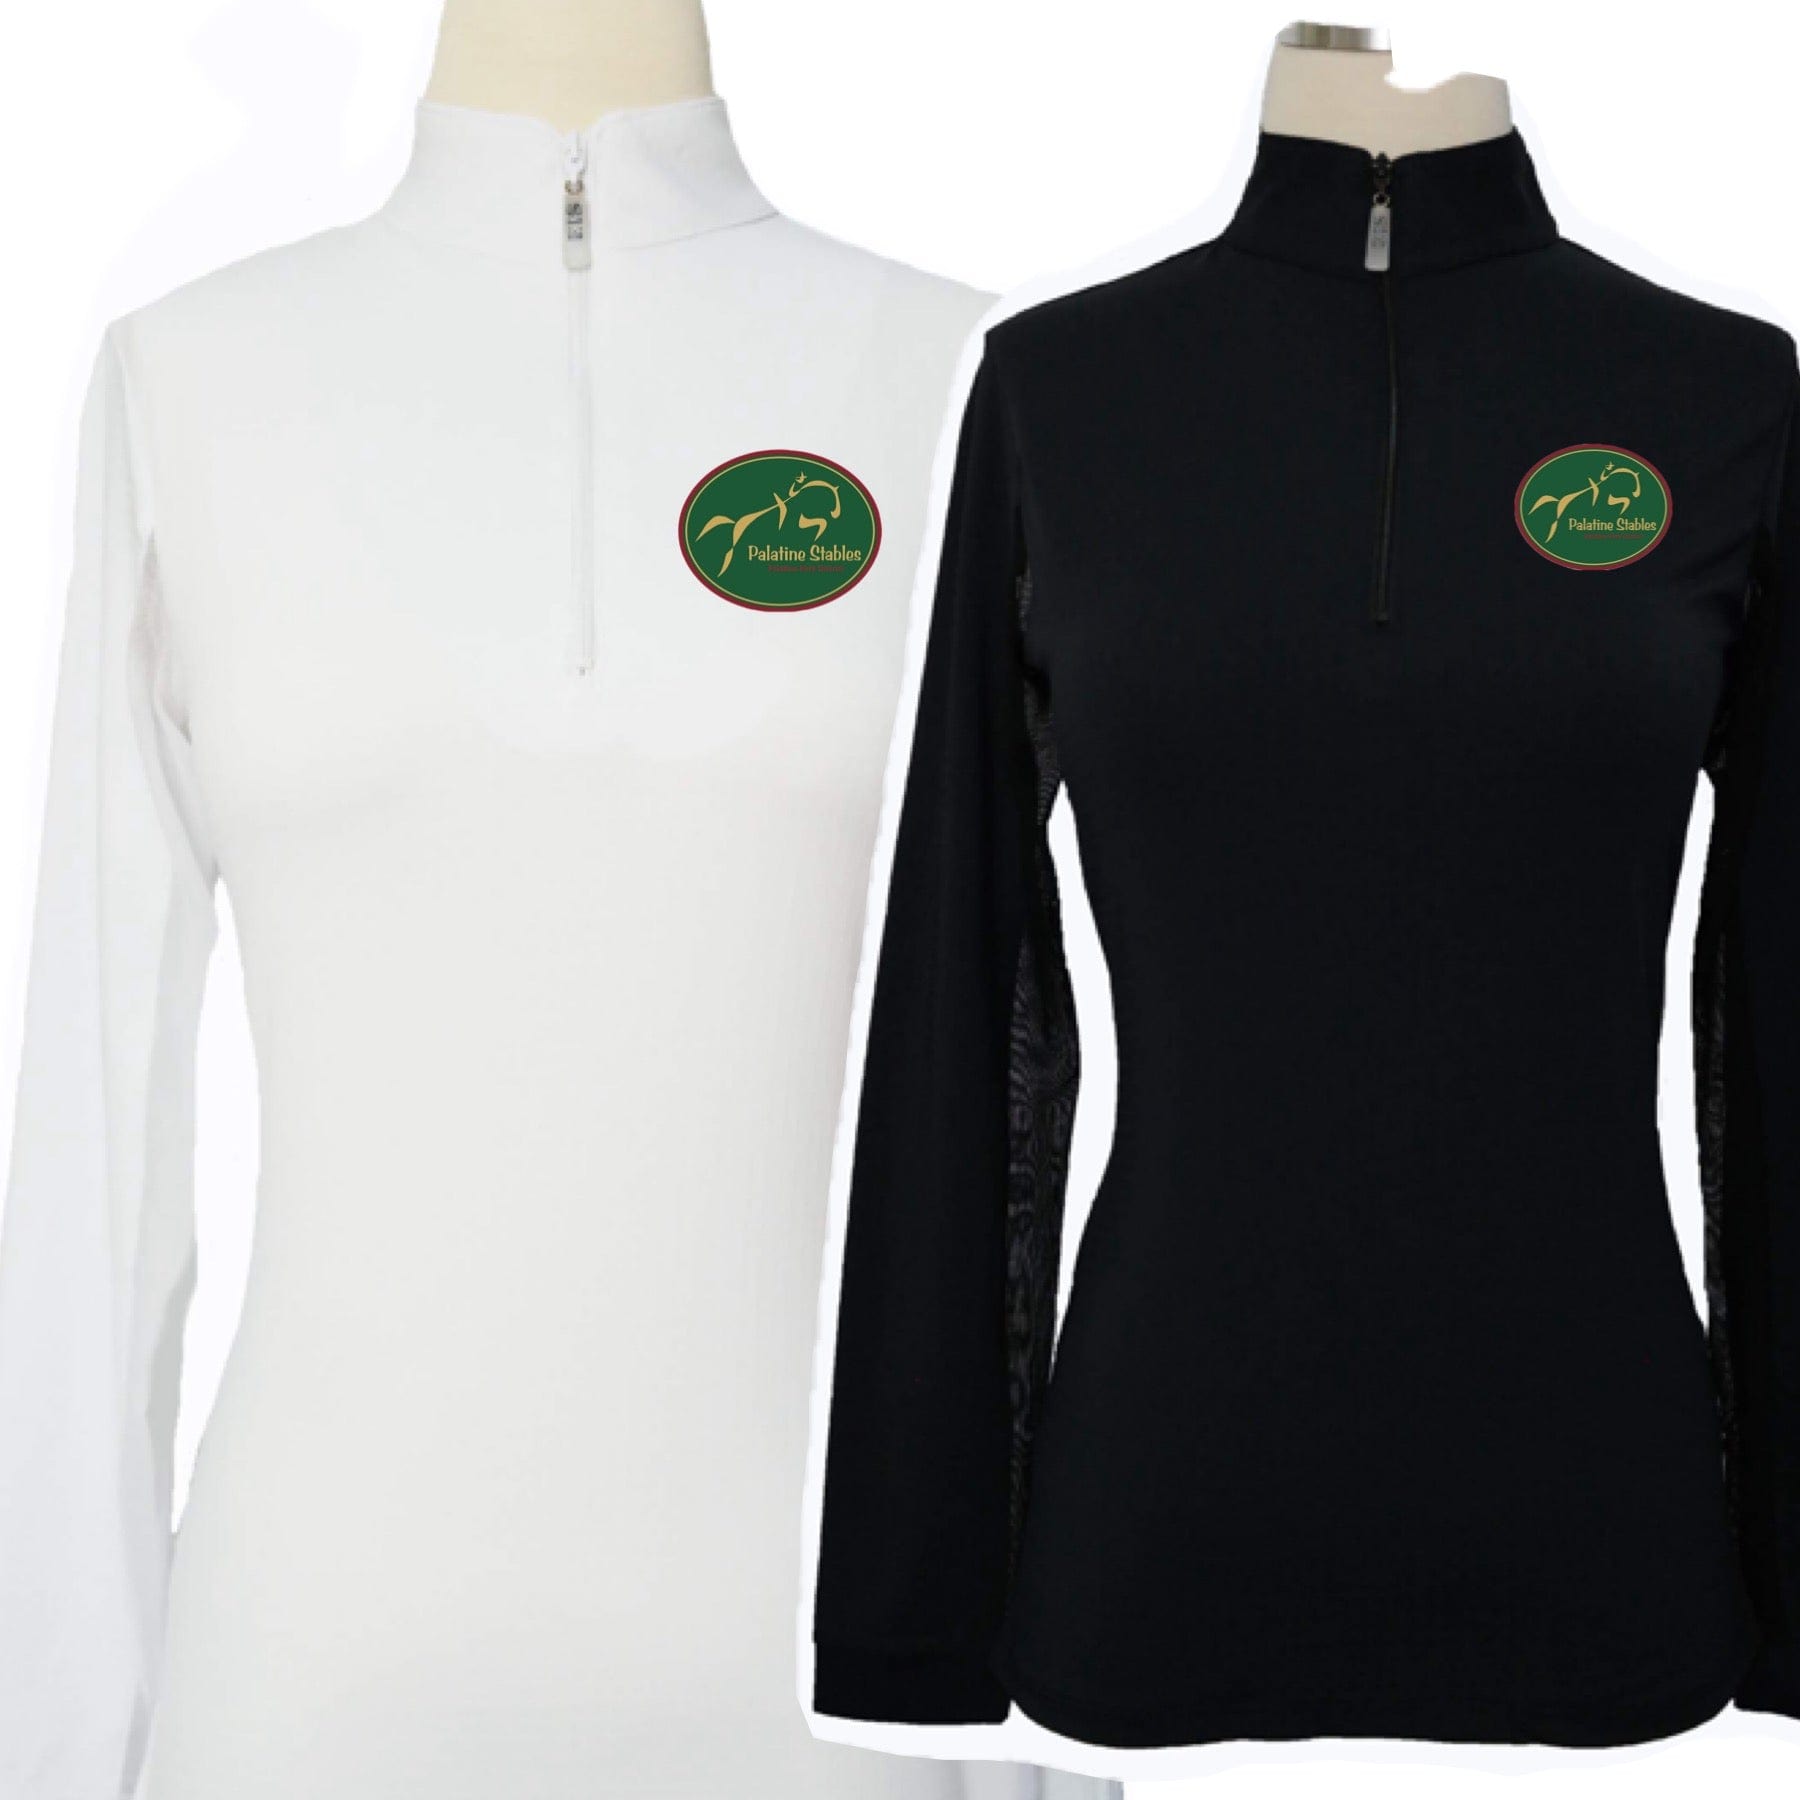 Equestrian Team Apparel Palatine Stables Sun Shirt equestrian team apparel online tack store mobile tack store custom farm apparel custom show stable clothing equestrian lifestyle horse show clothing riding clothes horses equestrian tack store